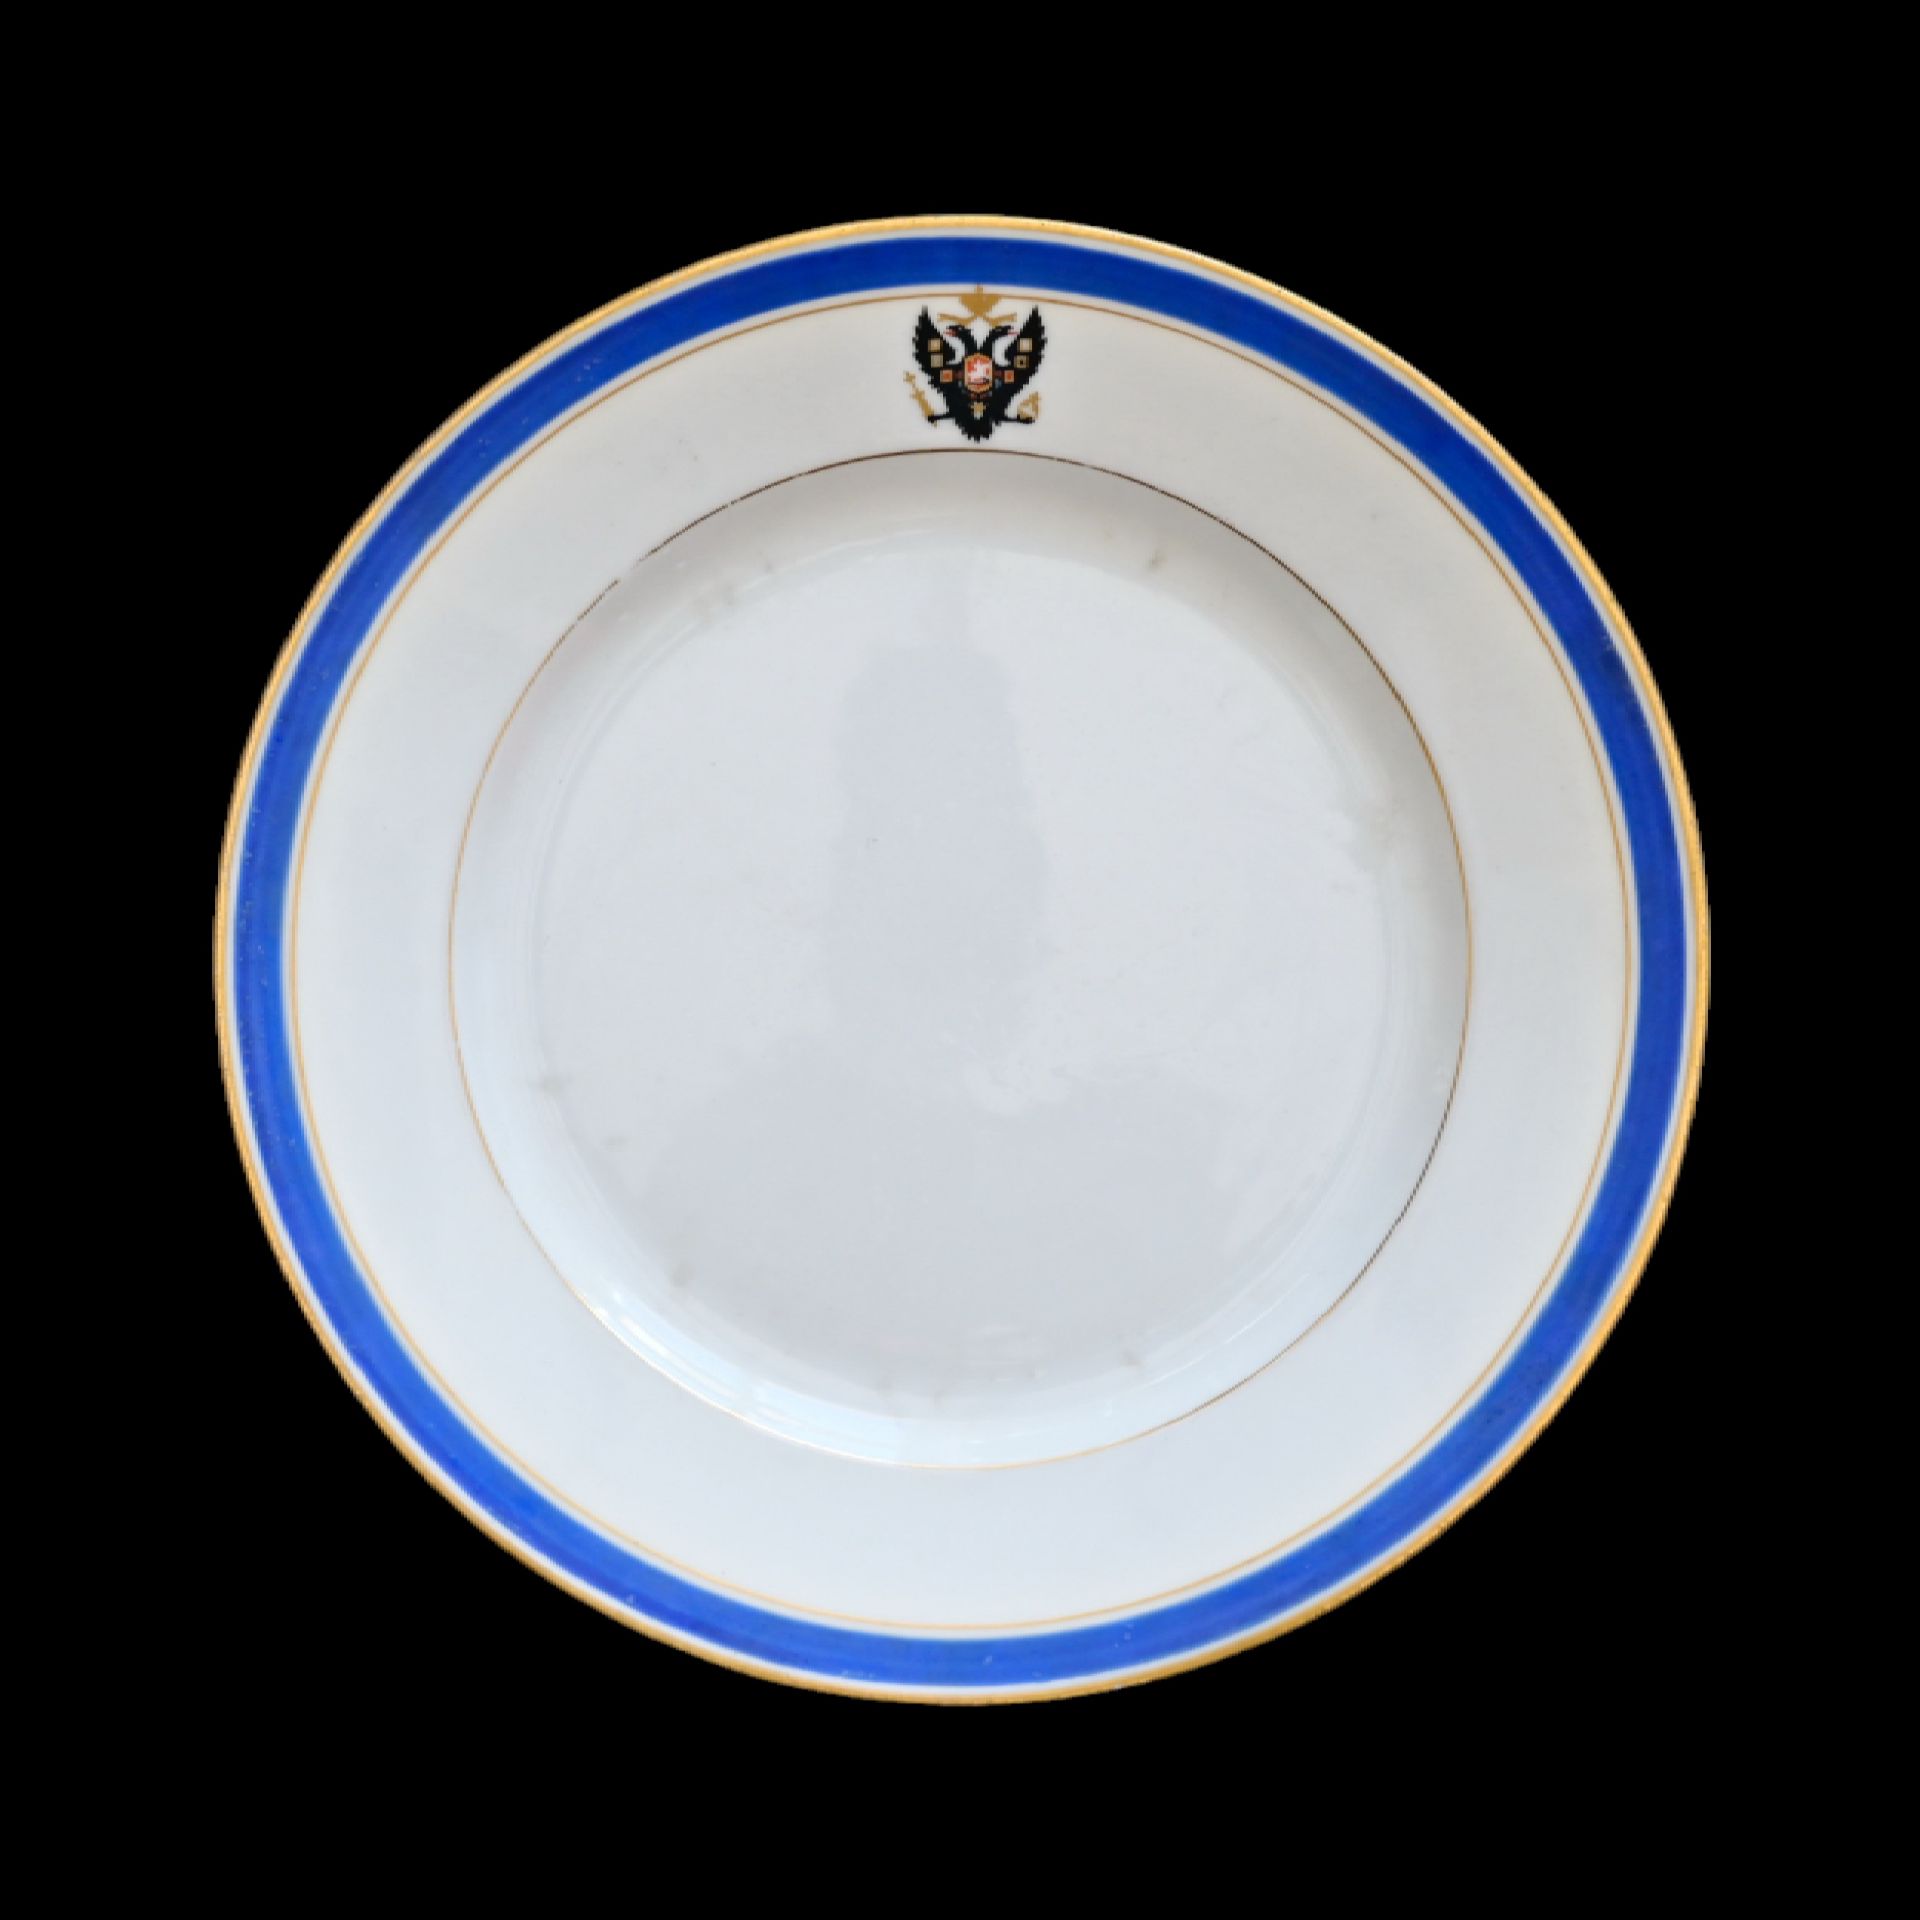 Plate from the dinner service of the Russian Emperor Nicholas II from the yacht "Alexandria", 1885.